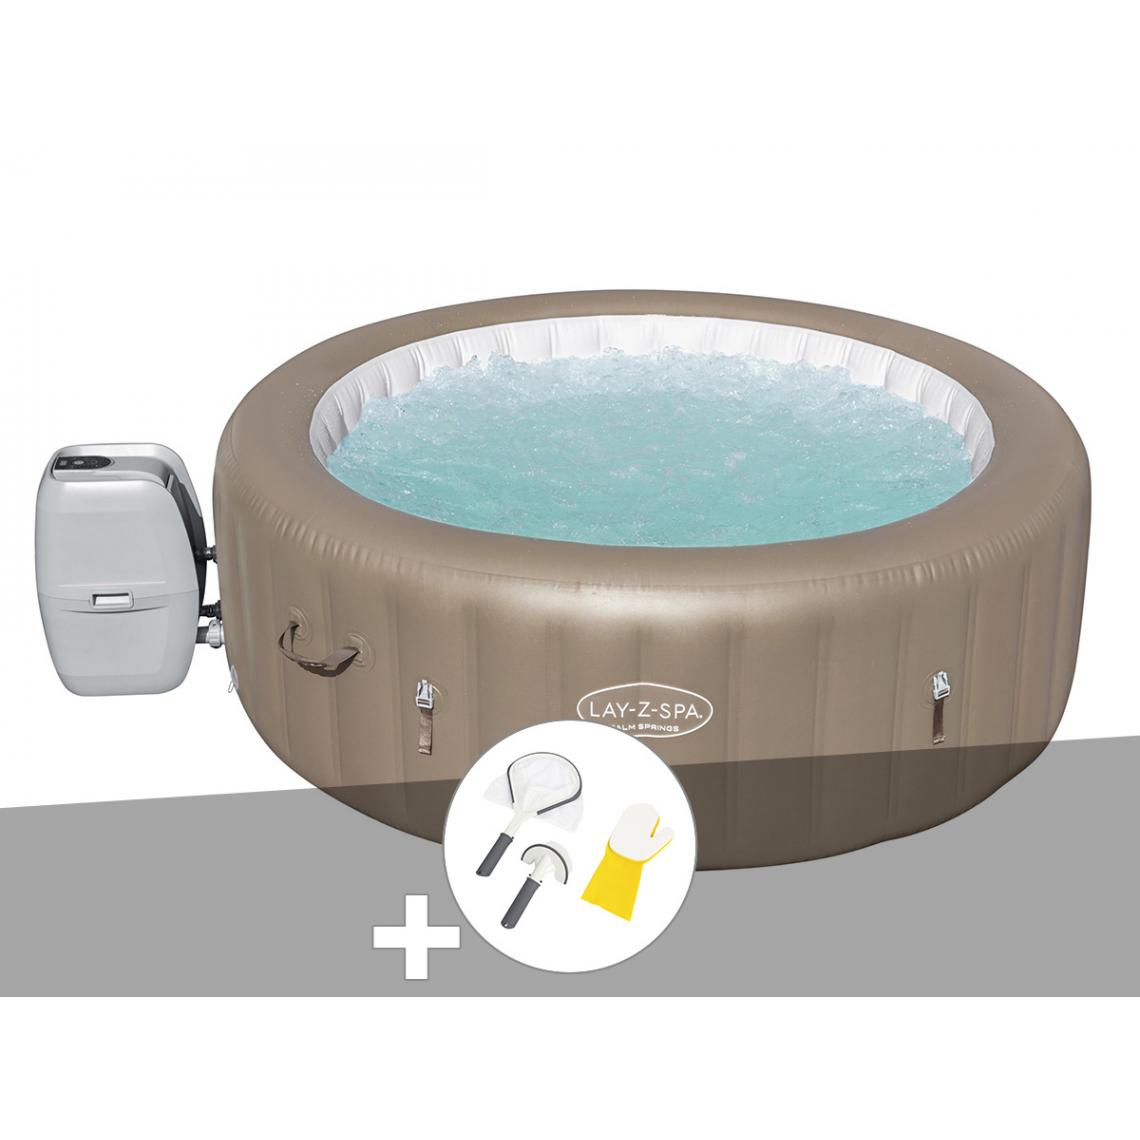 Bestway - Kit spa gonflable Bestway Lay-Z-Spa Palm Springs rond Airjet 4/6 places + Kit de nettoyage - Spa gonflable